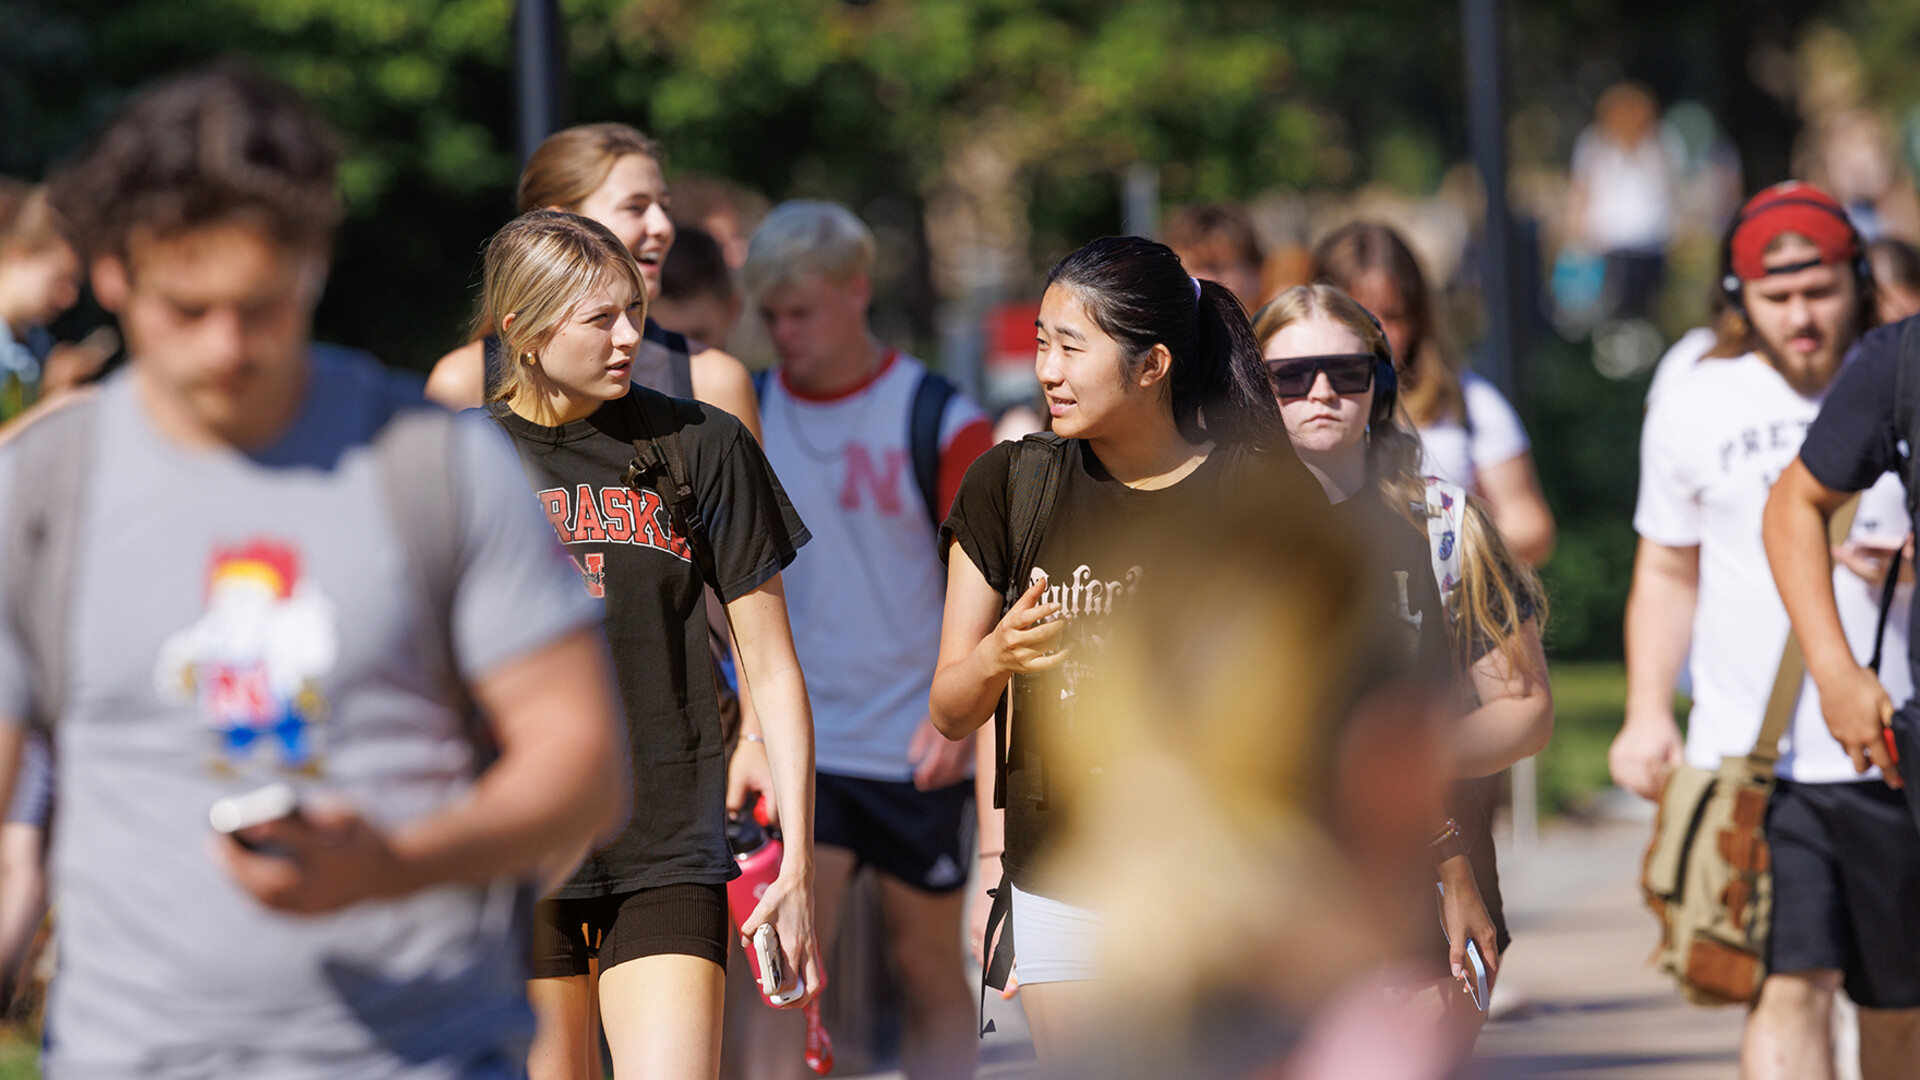 Student body grows in total Nebraskans, first-time Huskers, diversity